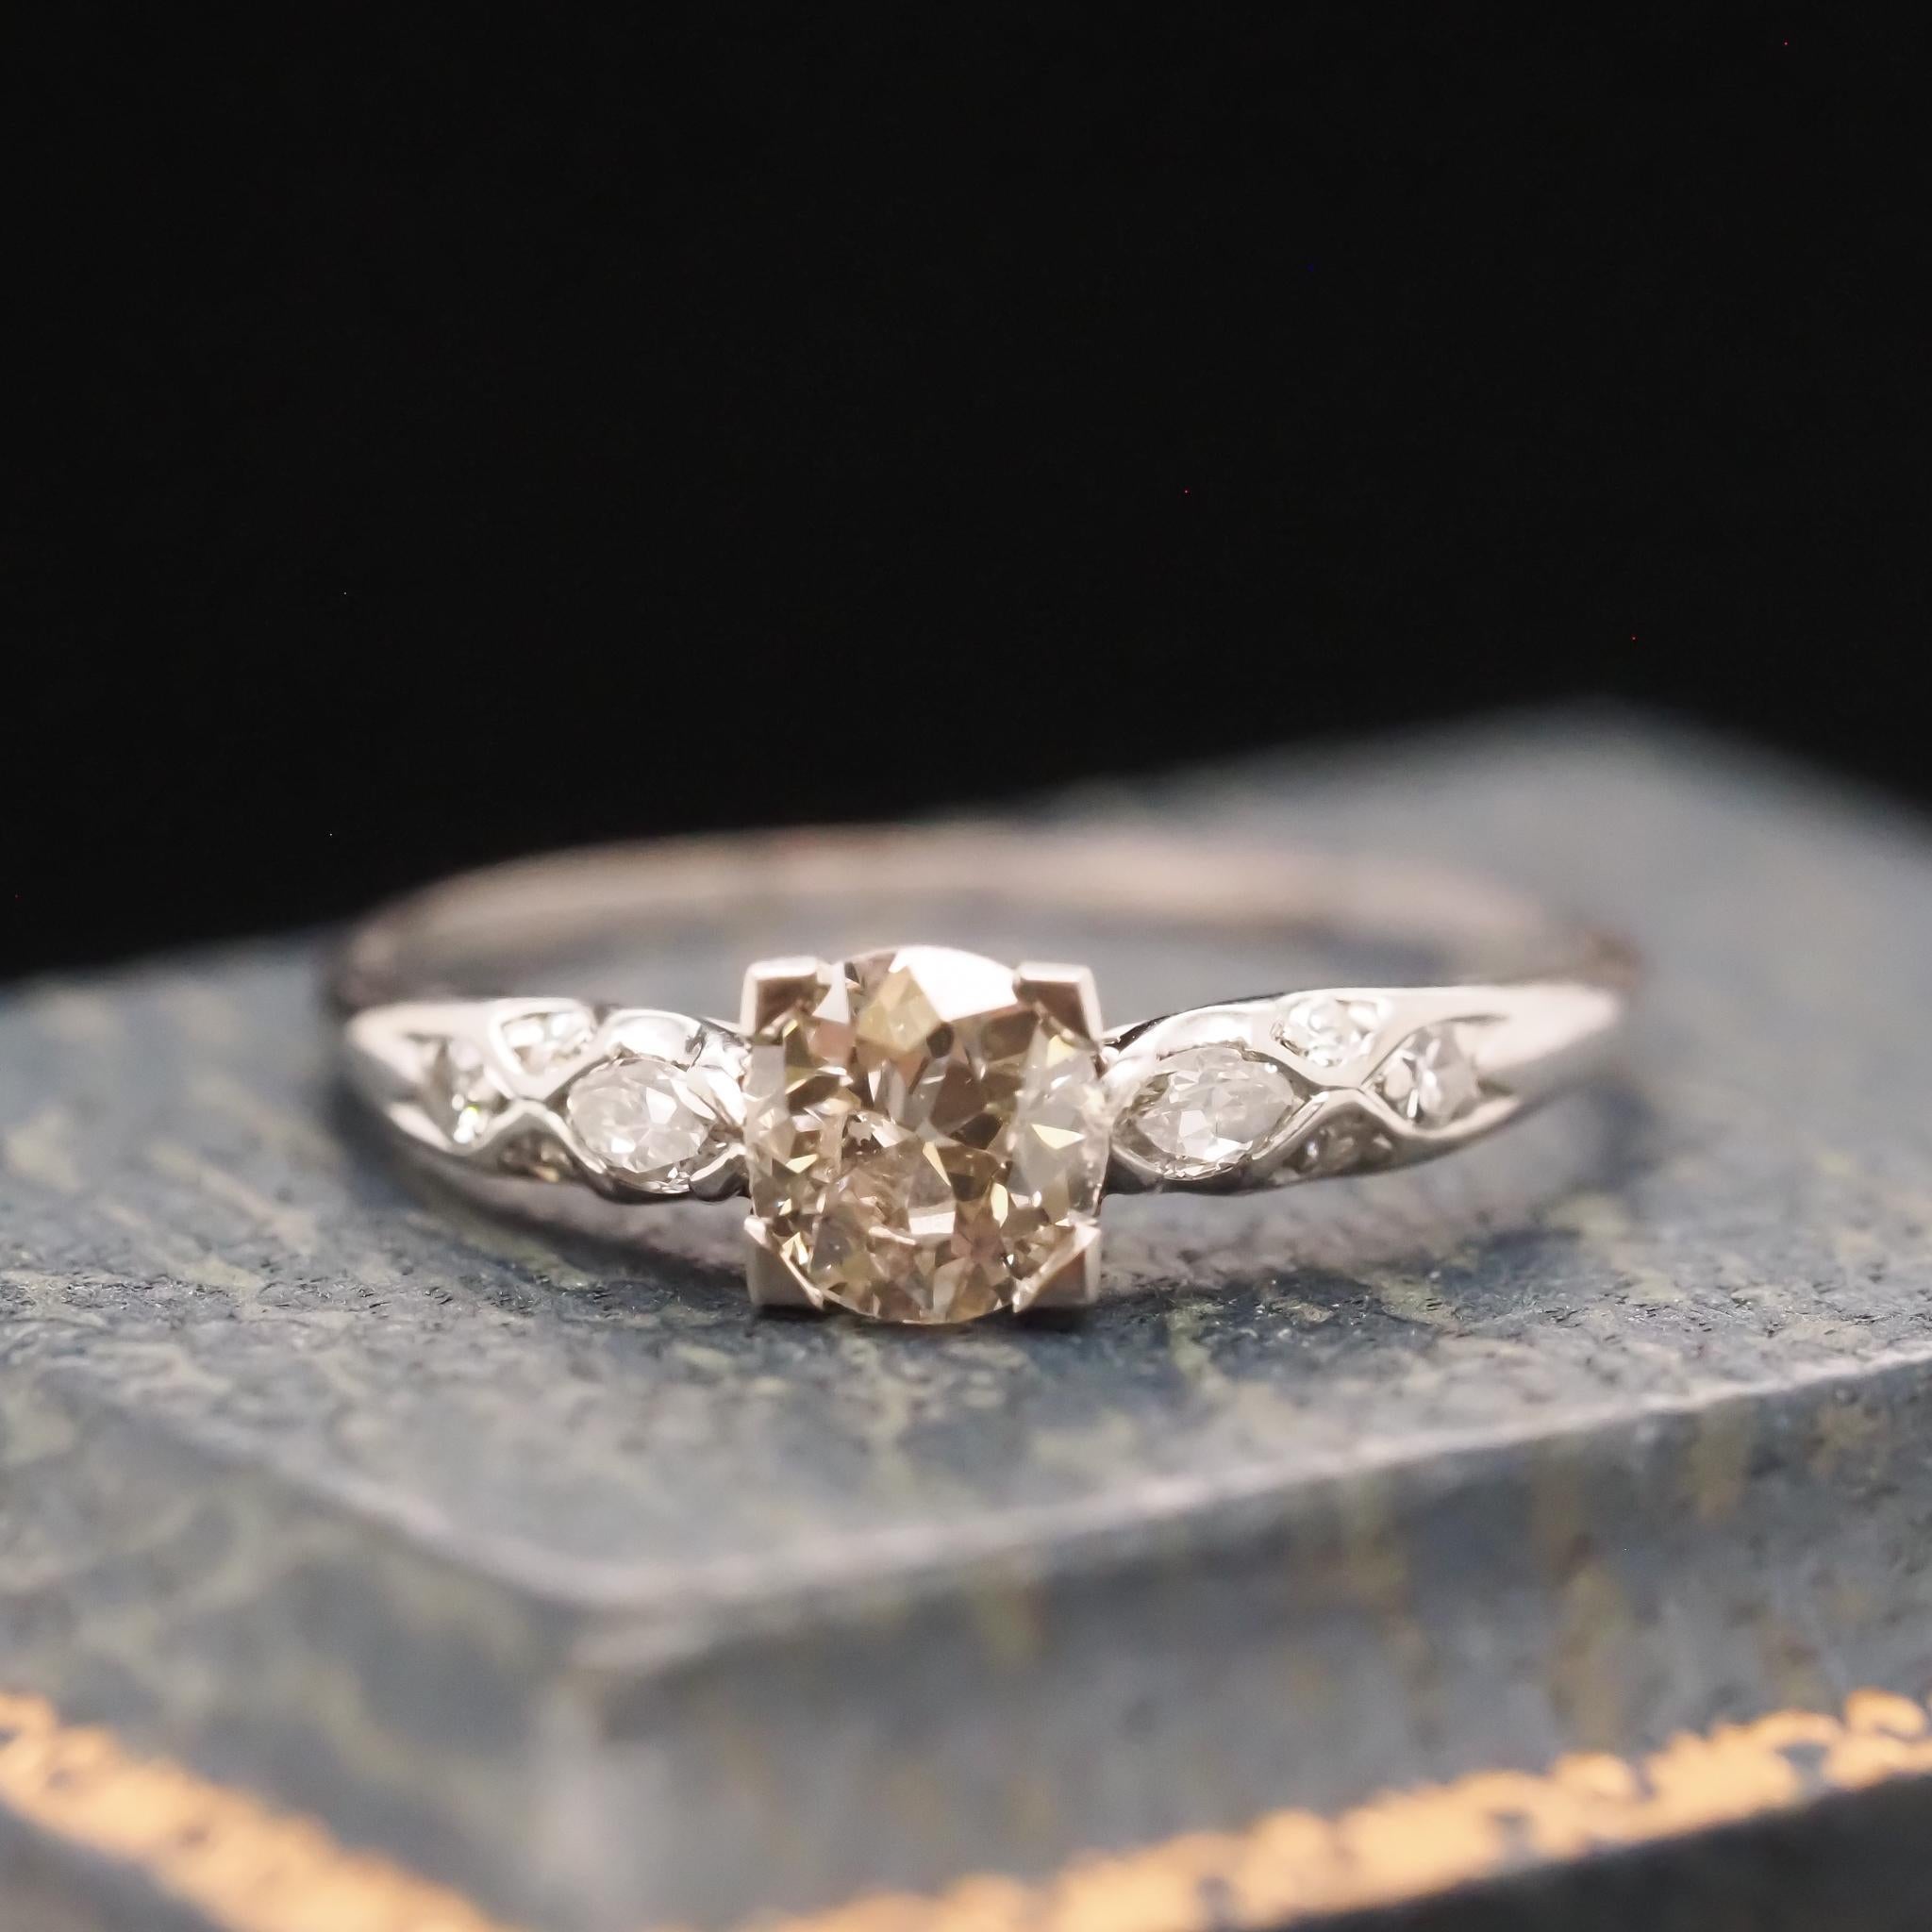 Item Details:
Metal Type: Platinum [Hallmarked, and Tested]
Weight: 2.8 grams
Center Diamond Details: .60ct, Old European Brilliant, H Color, SI1 Clarity
Side Diamonds: Antique Marquise and Antique Single Cut, .10ct total weight, G Color, VS